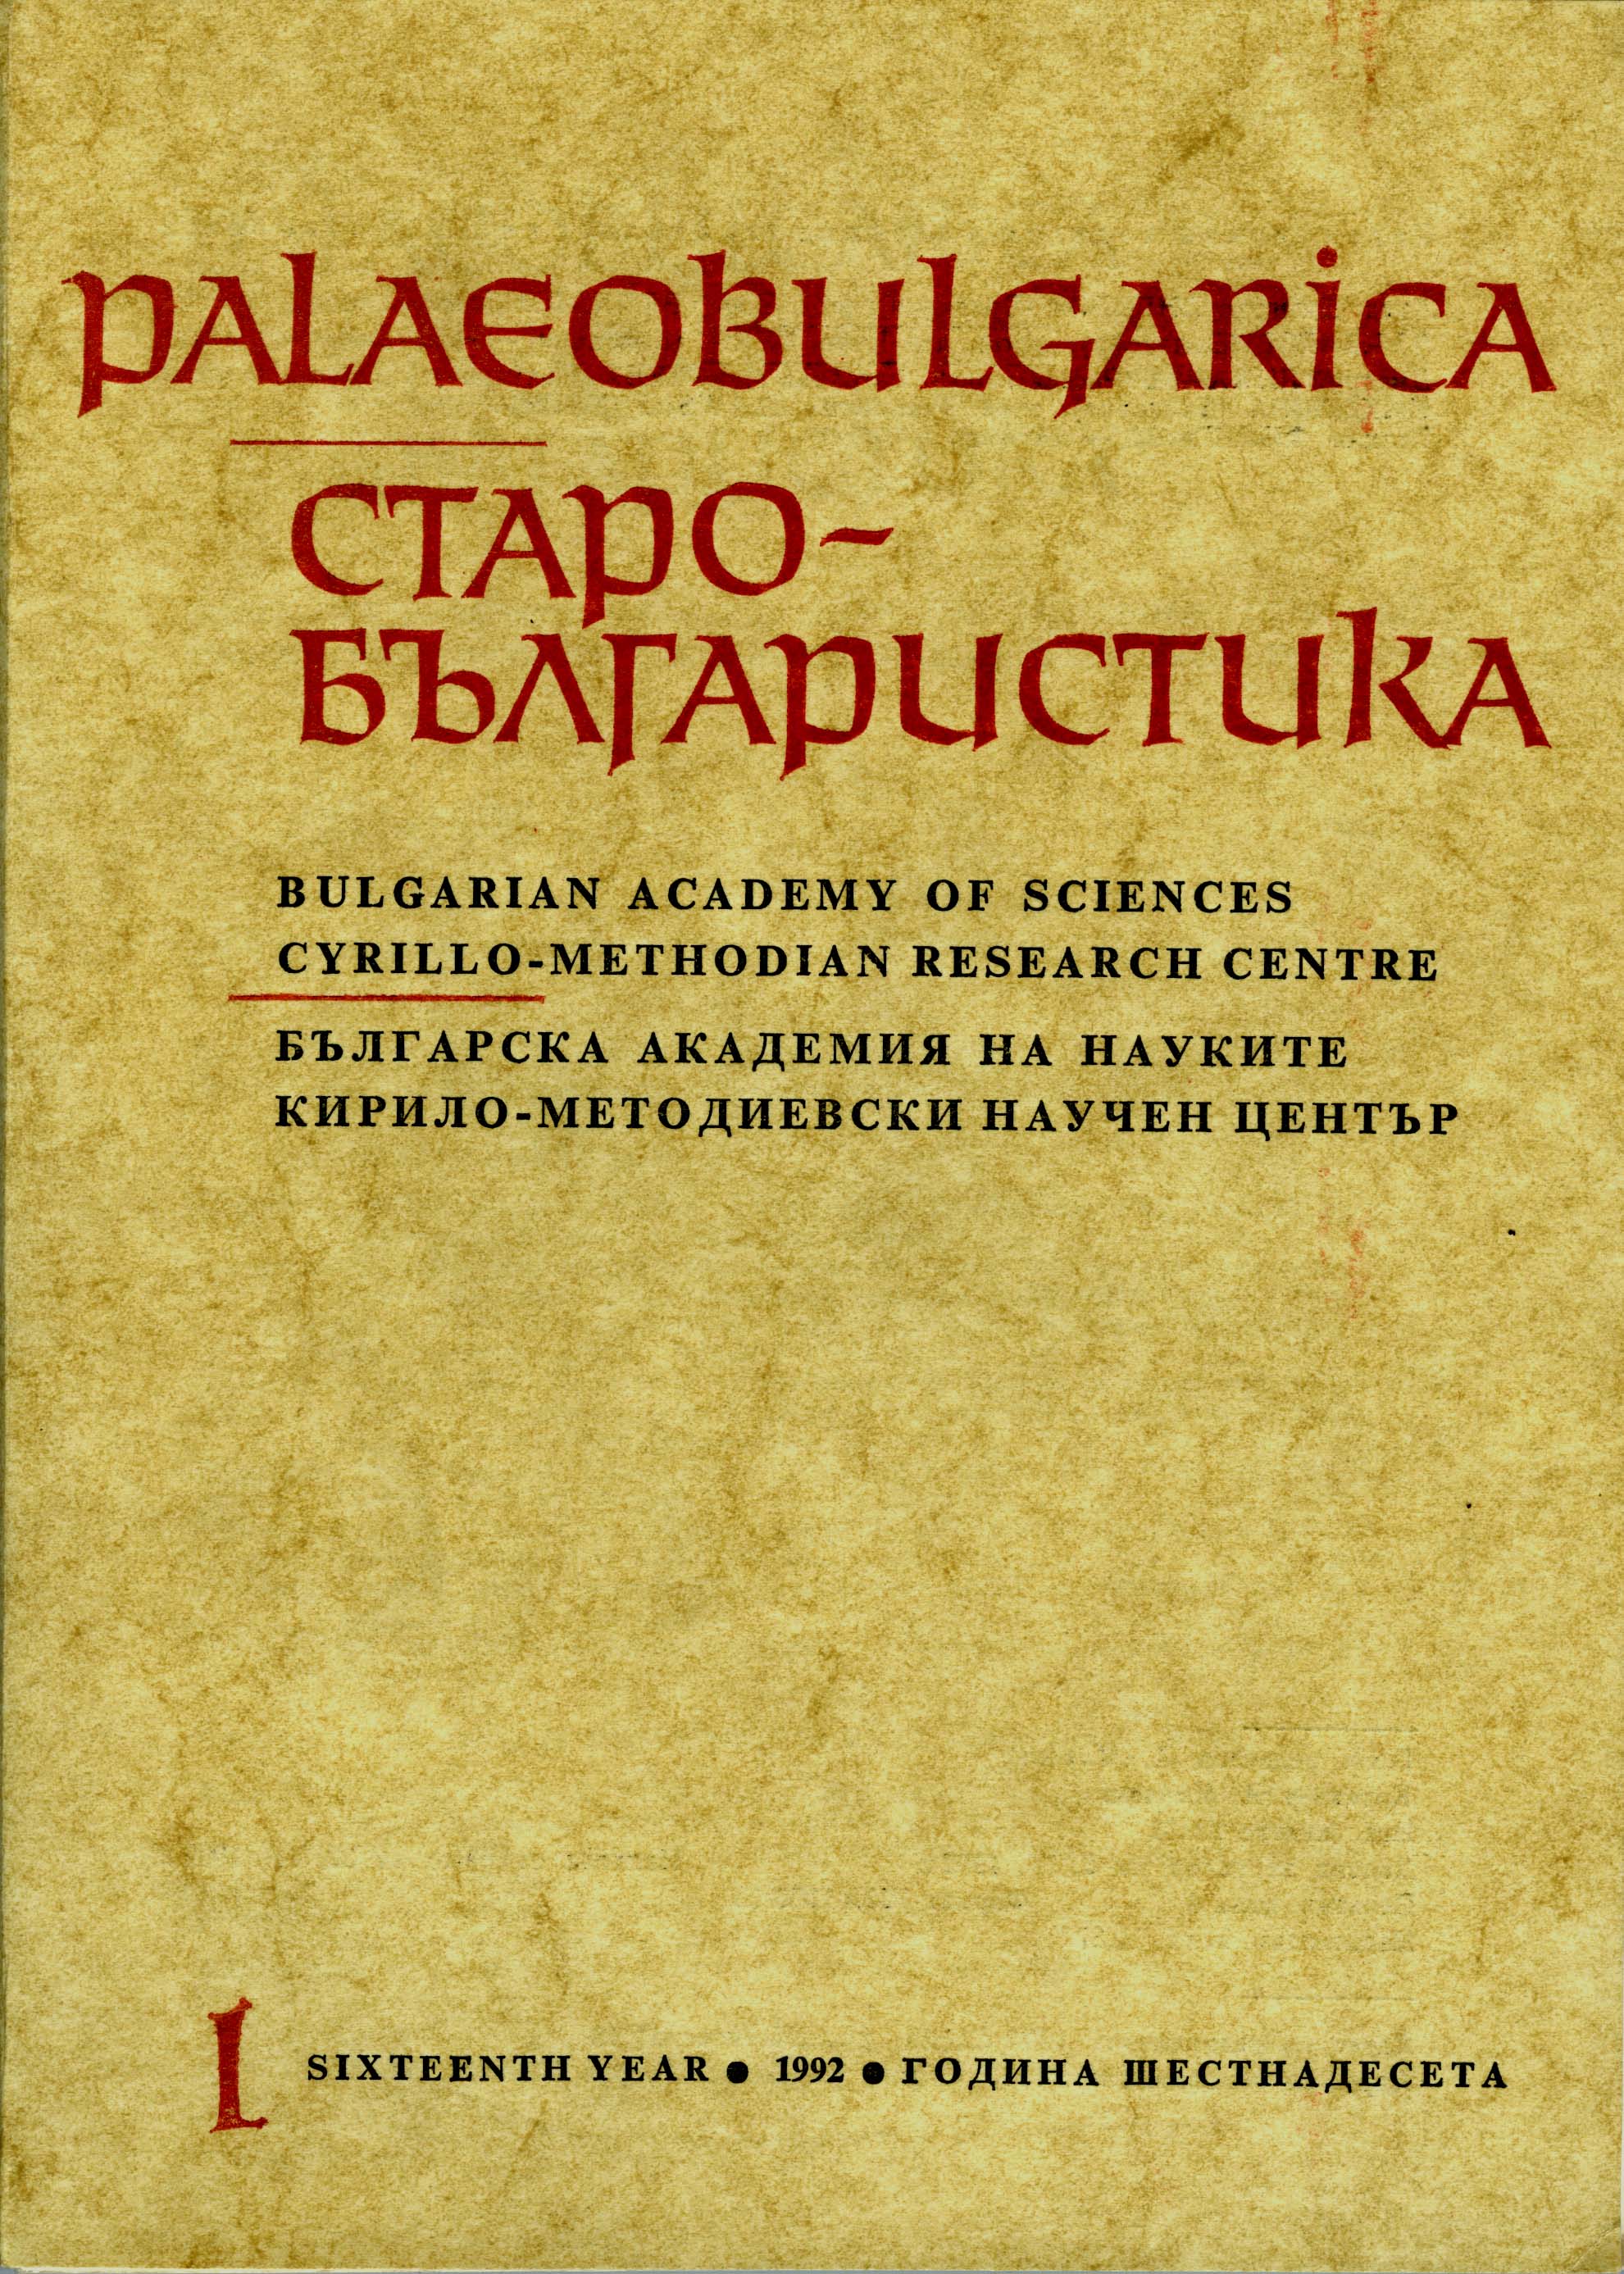 Evtimii’ Life of St. John of Rila in the Hagiographic Tradition Cover Image